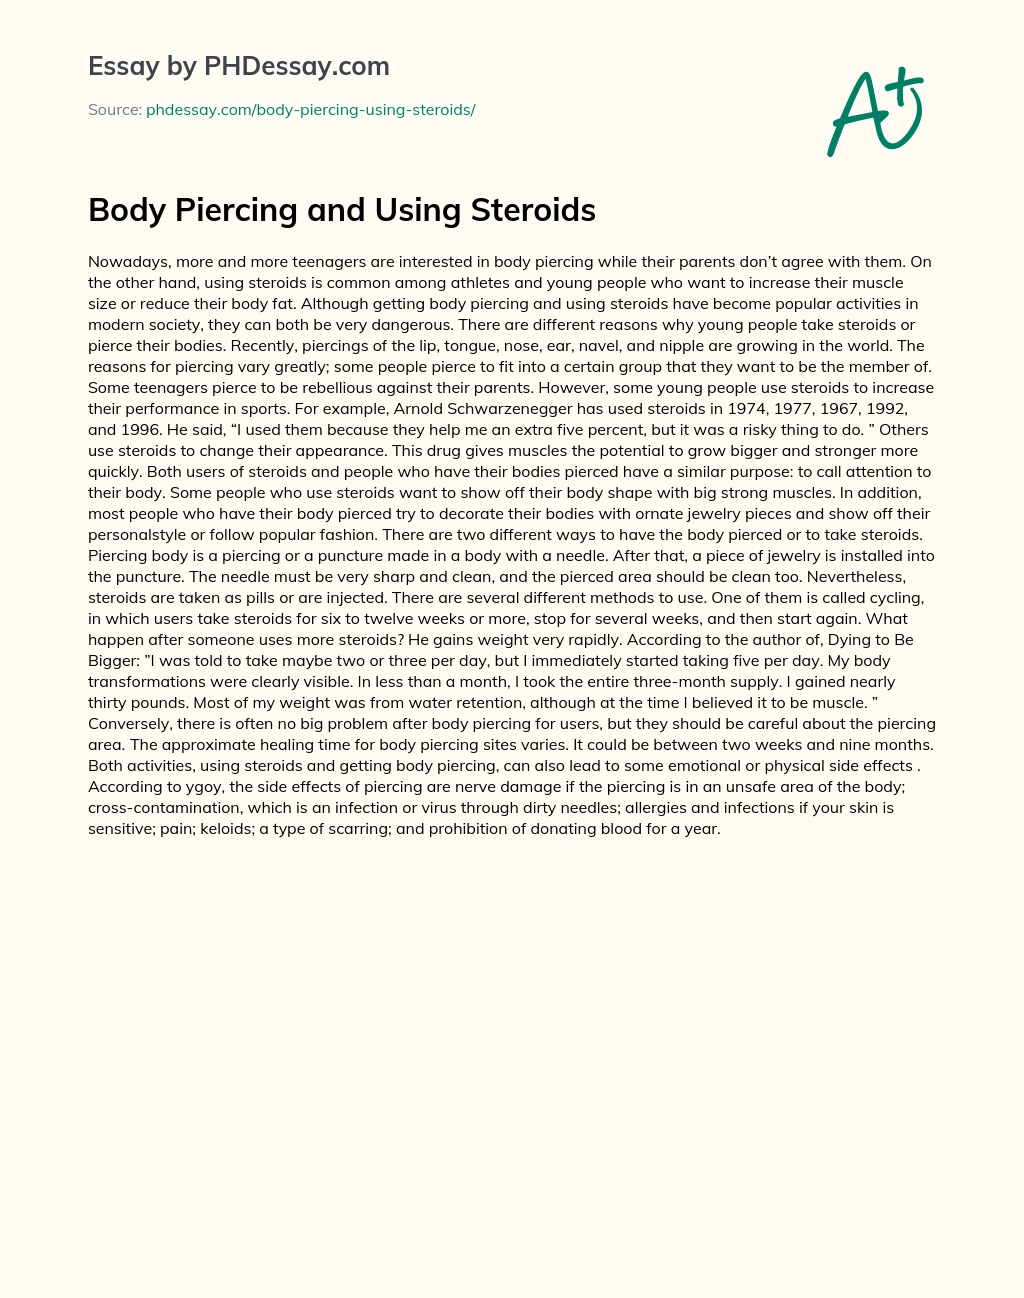 Body Piercing and Using Steroids essay